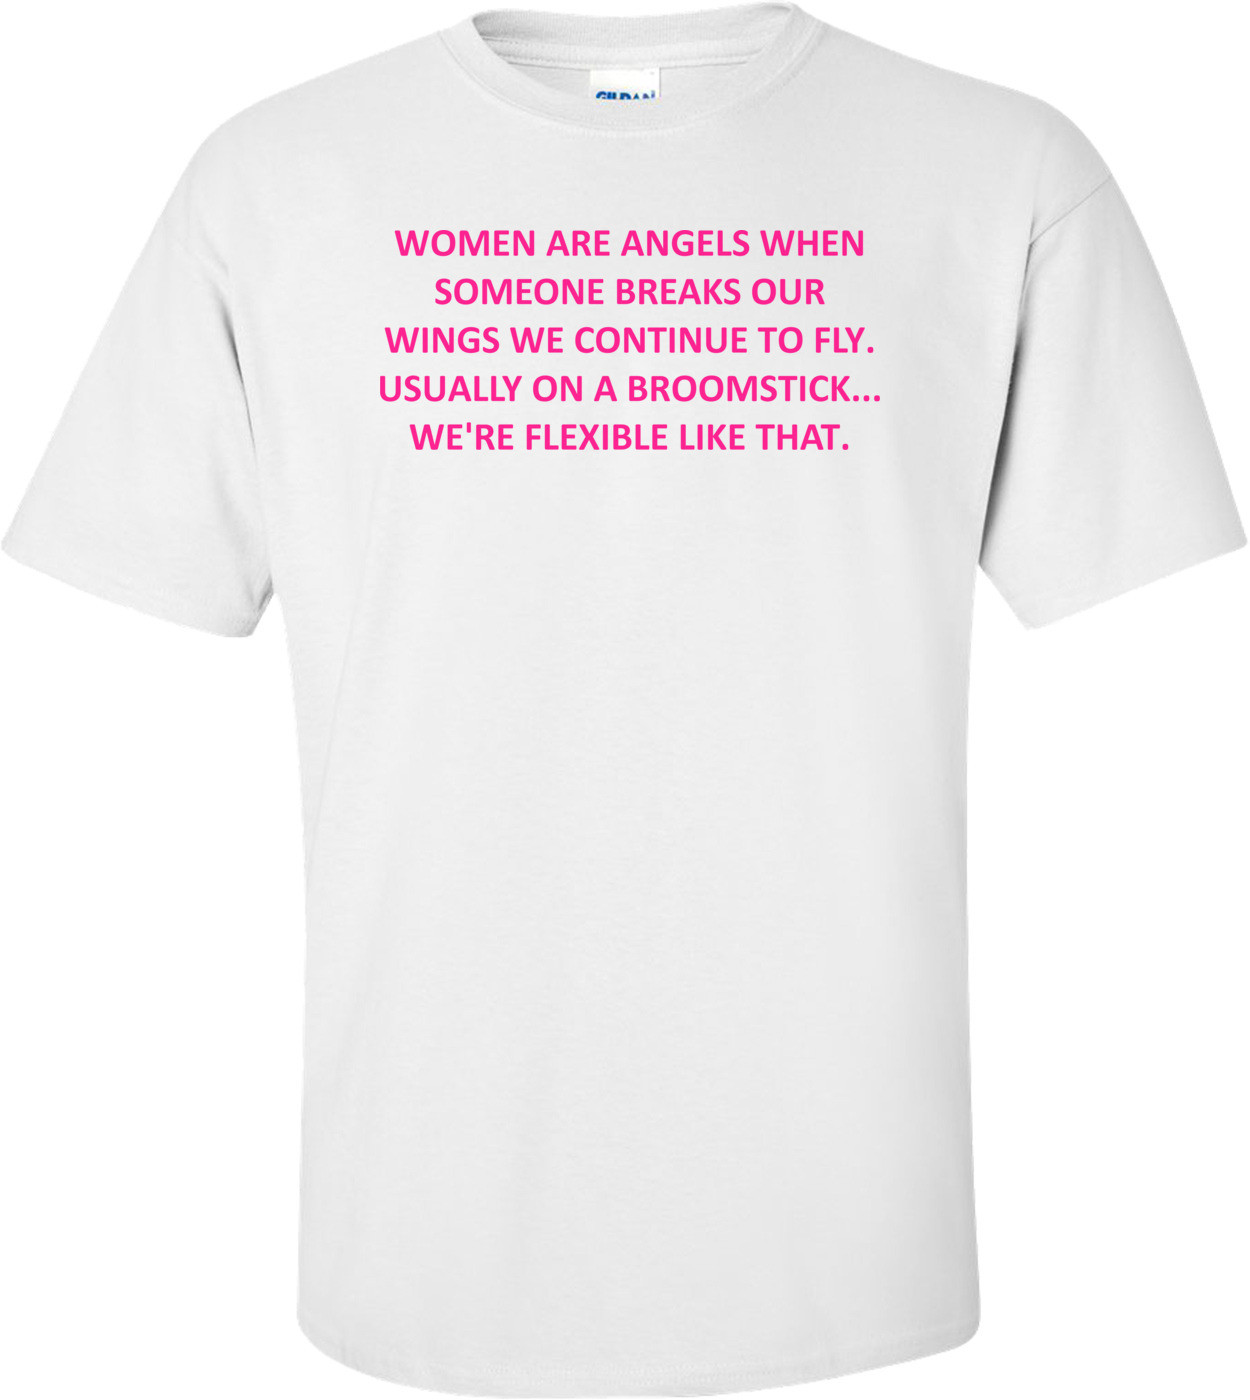 Women Are Angels When Someone Breaks Our Wings We Continue To Fly. Usually On A Broomstick... We're Flexible Like That. Shirt